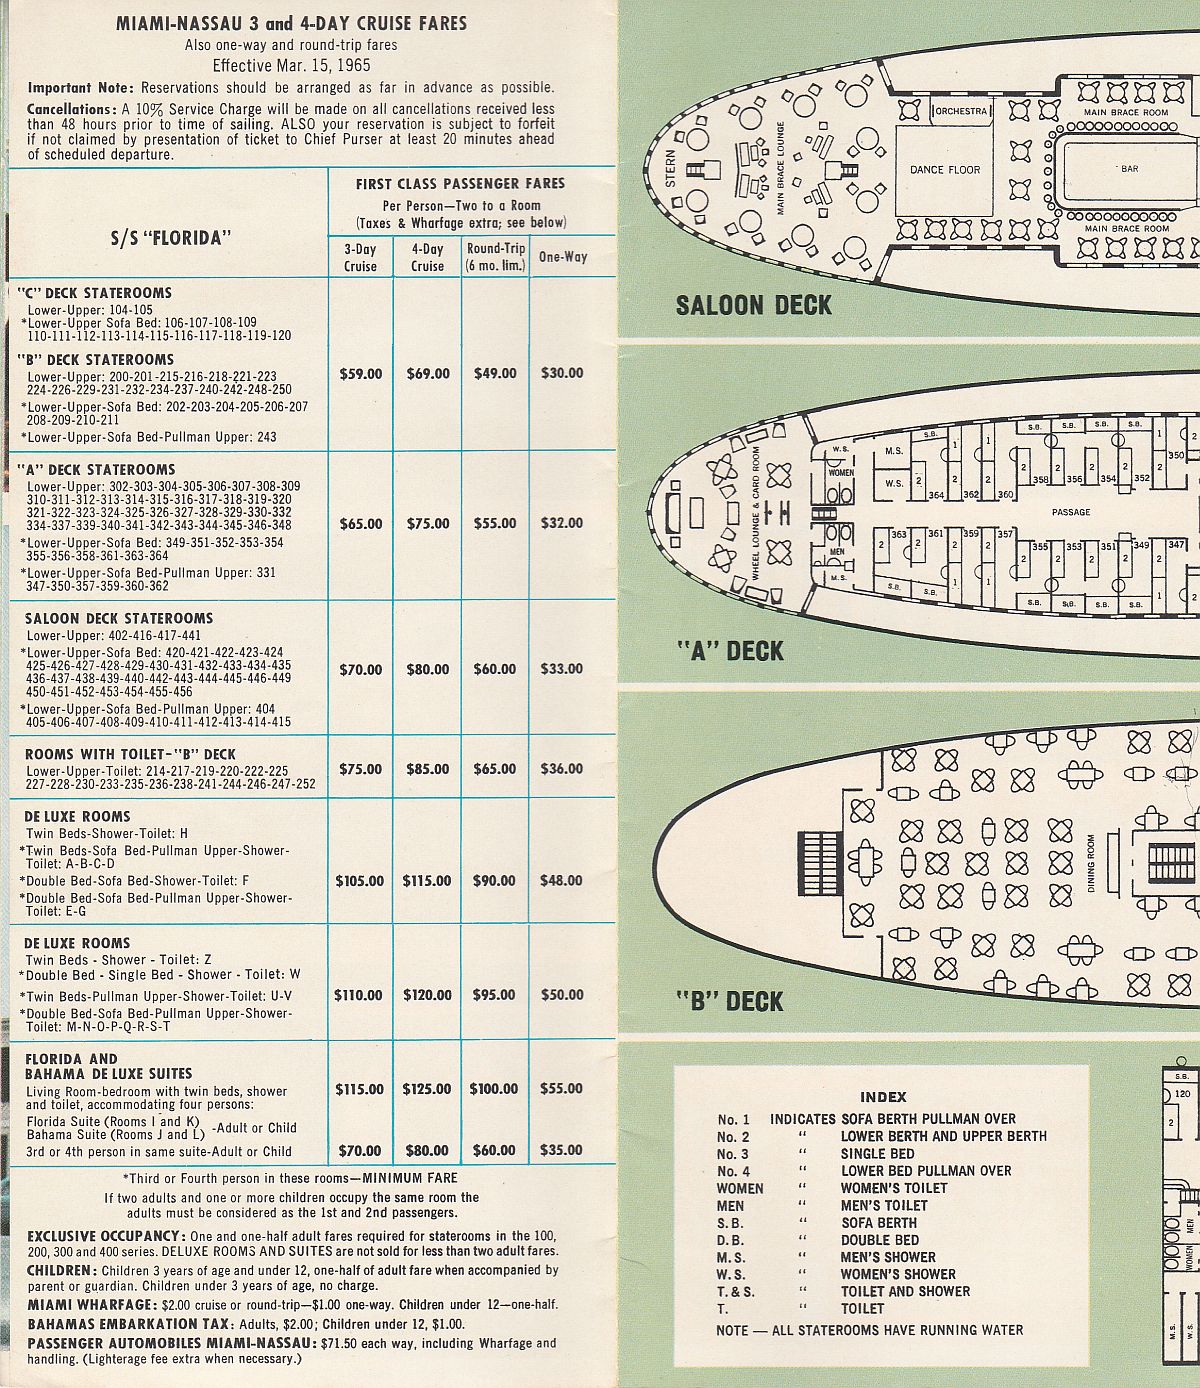 ss Florida Fares & deck plans: Miami-Nassau 3 and 4 day cruise fares and aft deck plans